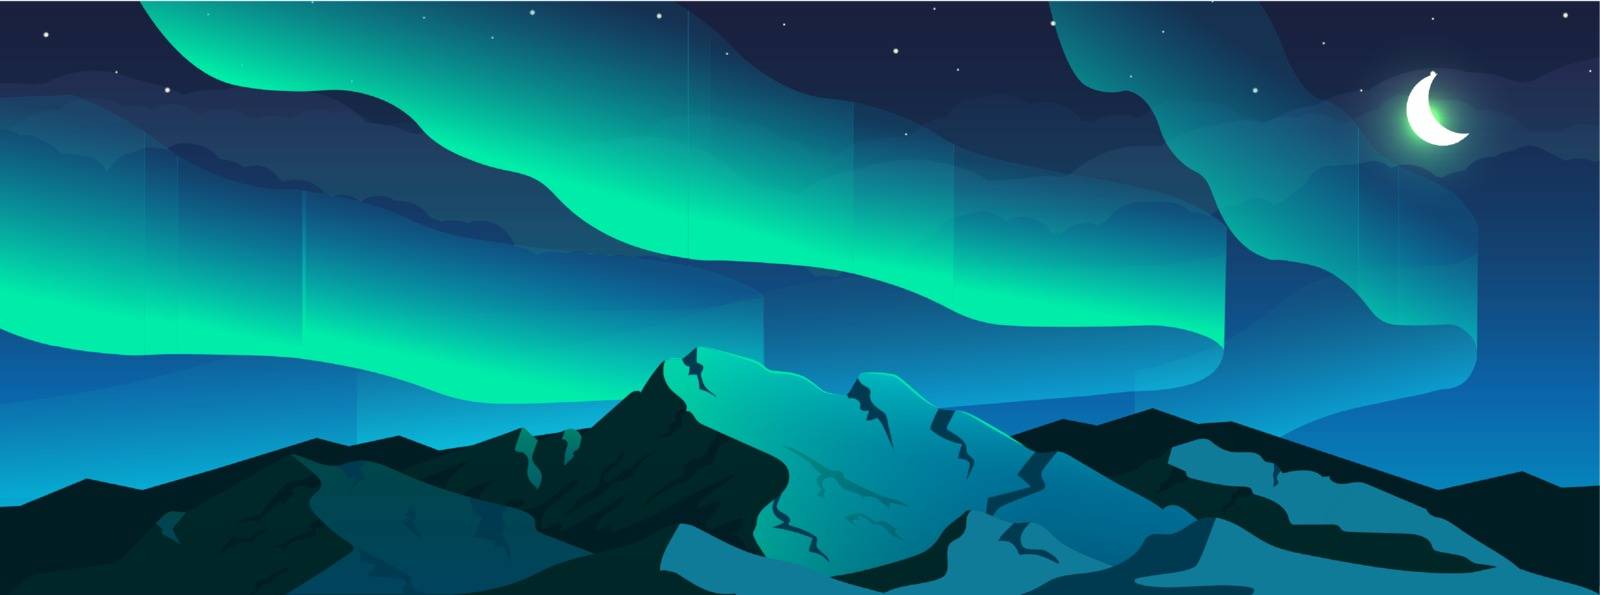 Aurora borealis phenomenon flat color vector illustration. Northern lights in sky and snowy mountain 2D cartoon night winter landscape with crescent moon and starry sky on background